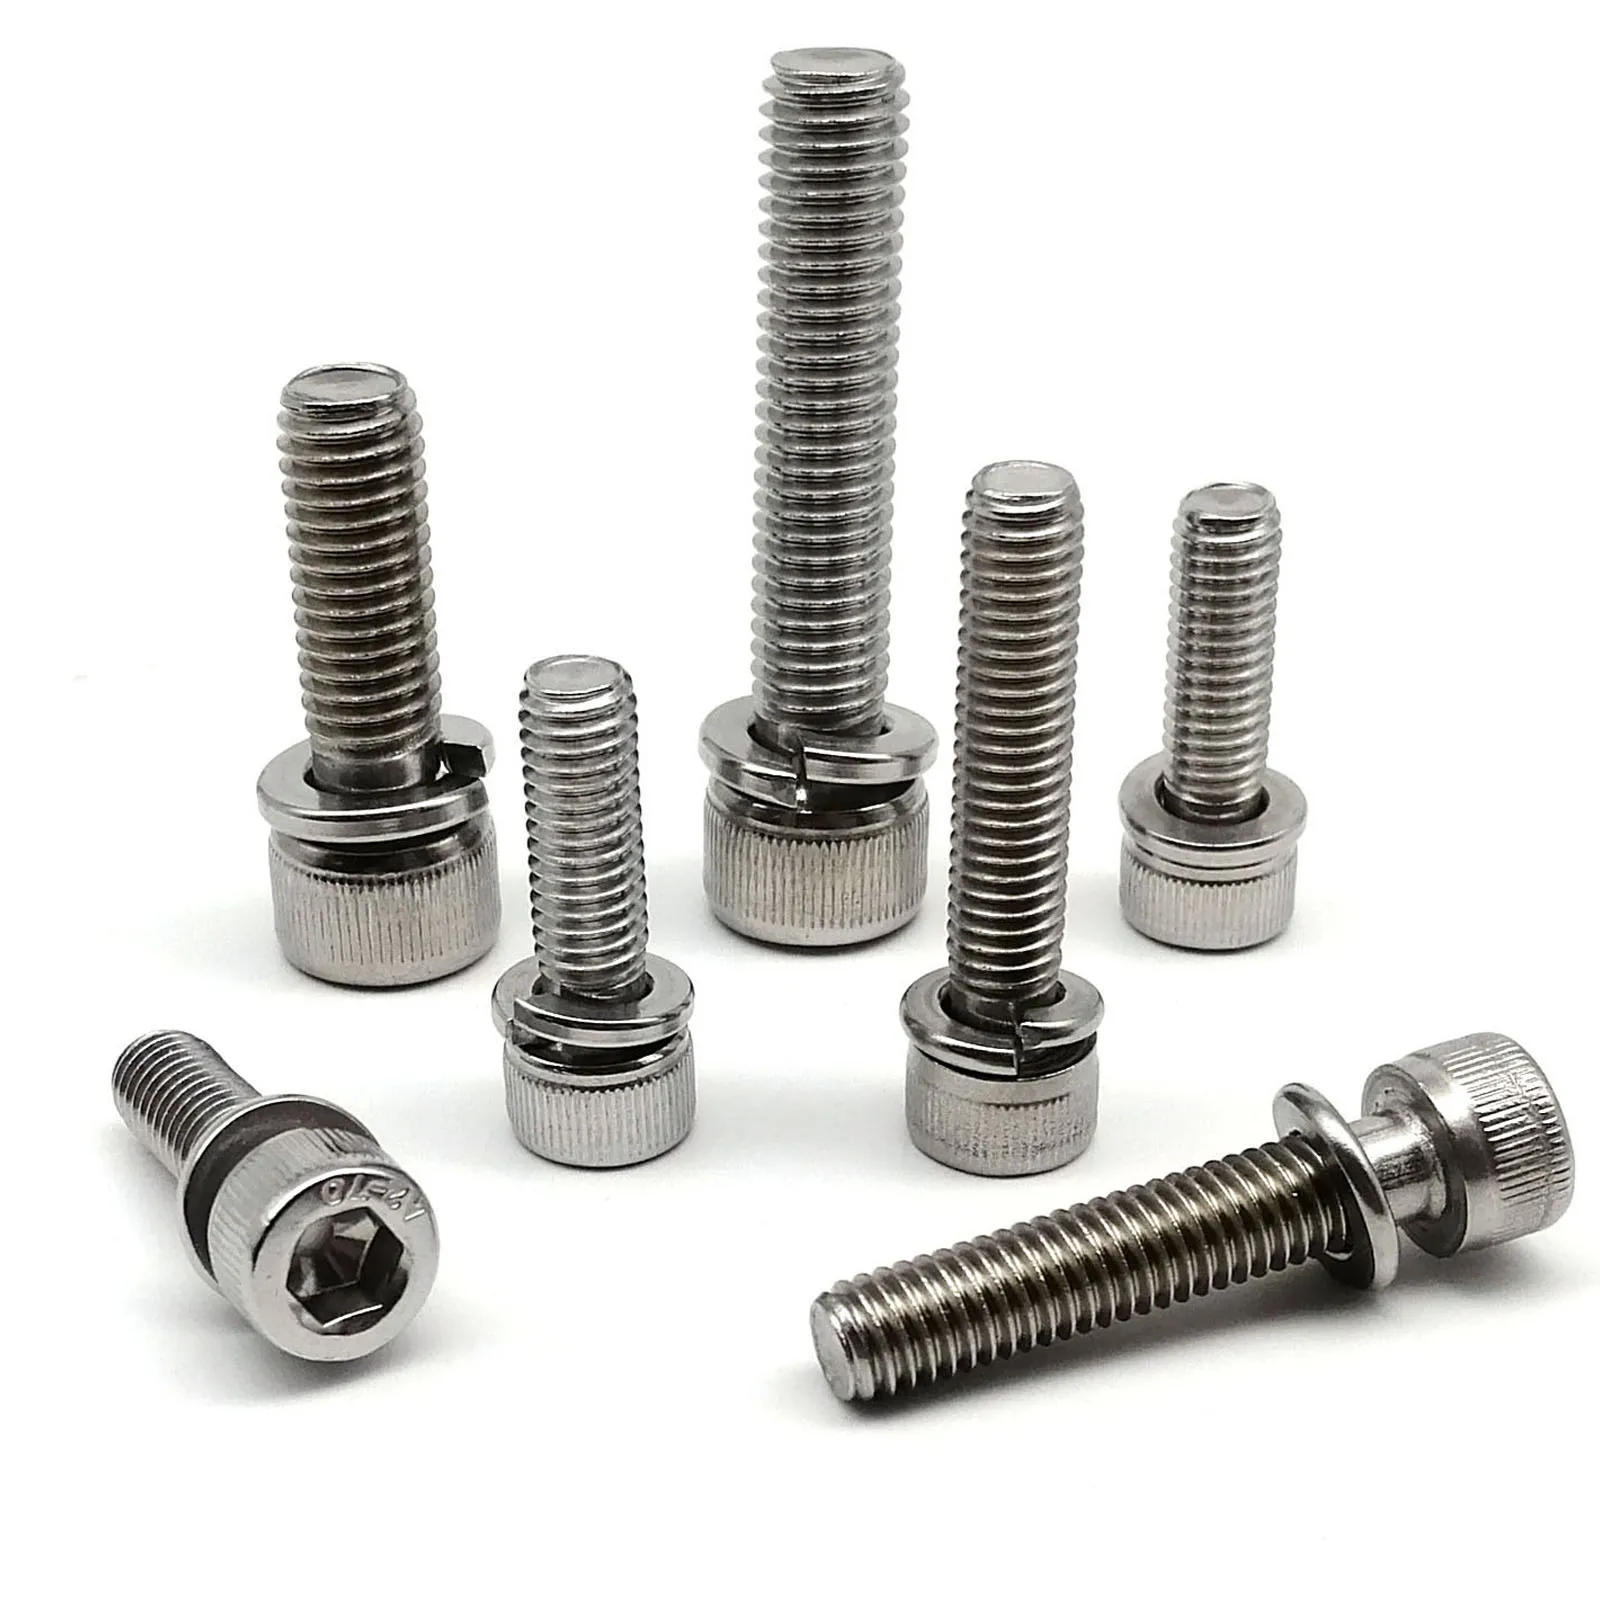 

M2 M2.5 M3 M4 M5 M6 M8 M10 304 A2 Stainless Steel Hexagon Hex Socket Cap Head SEM Screw with Spring Washer Gasket Assemble Bolt